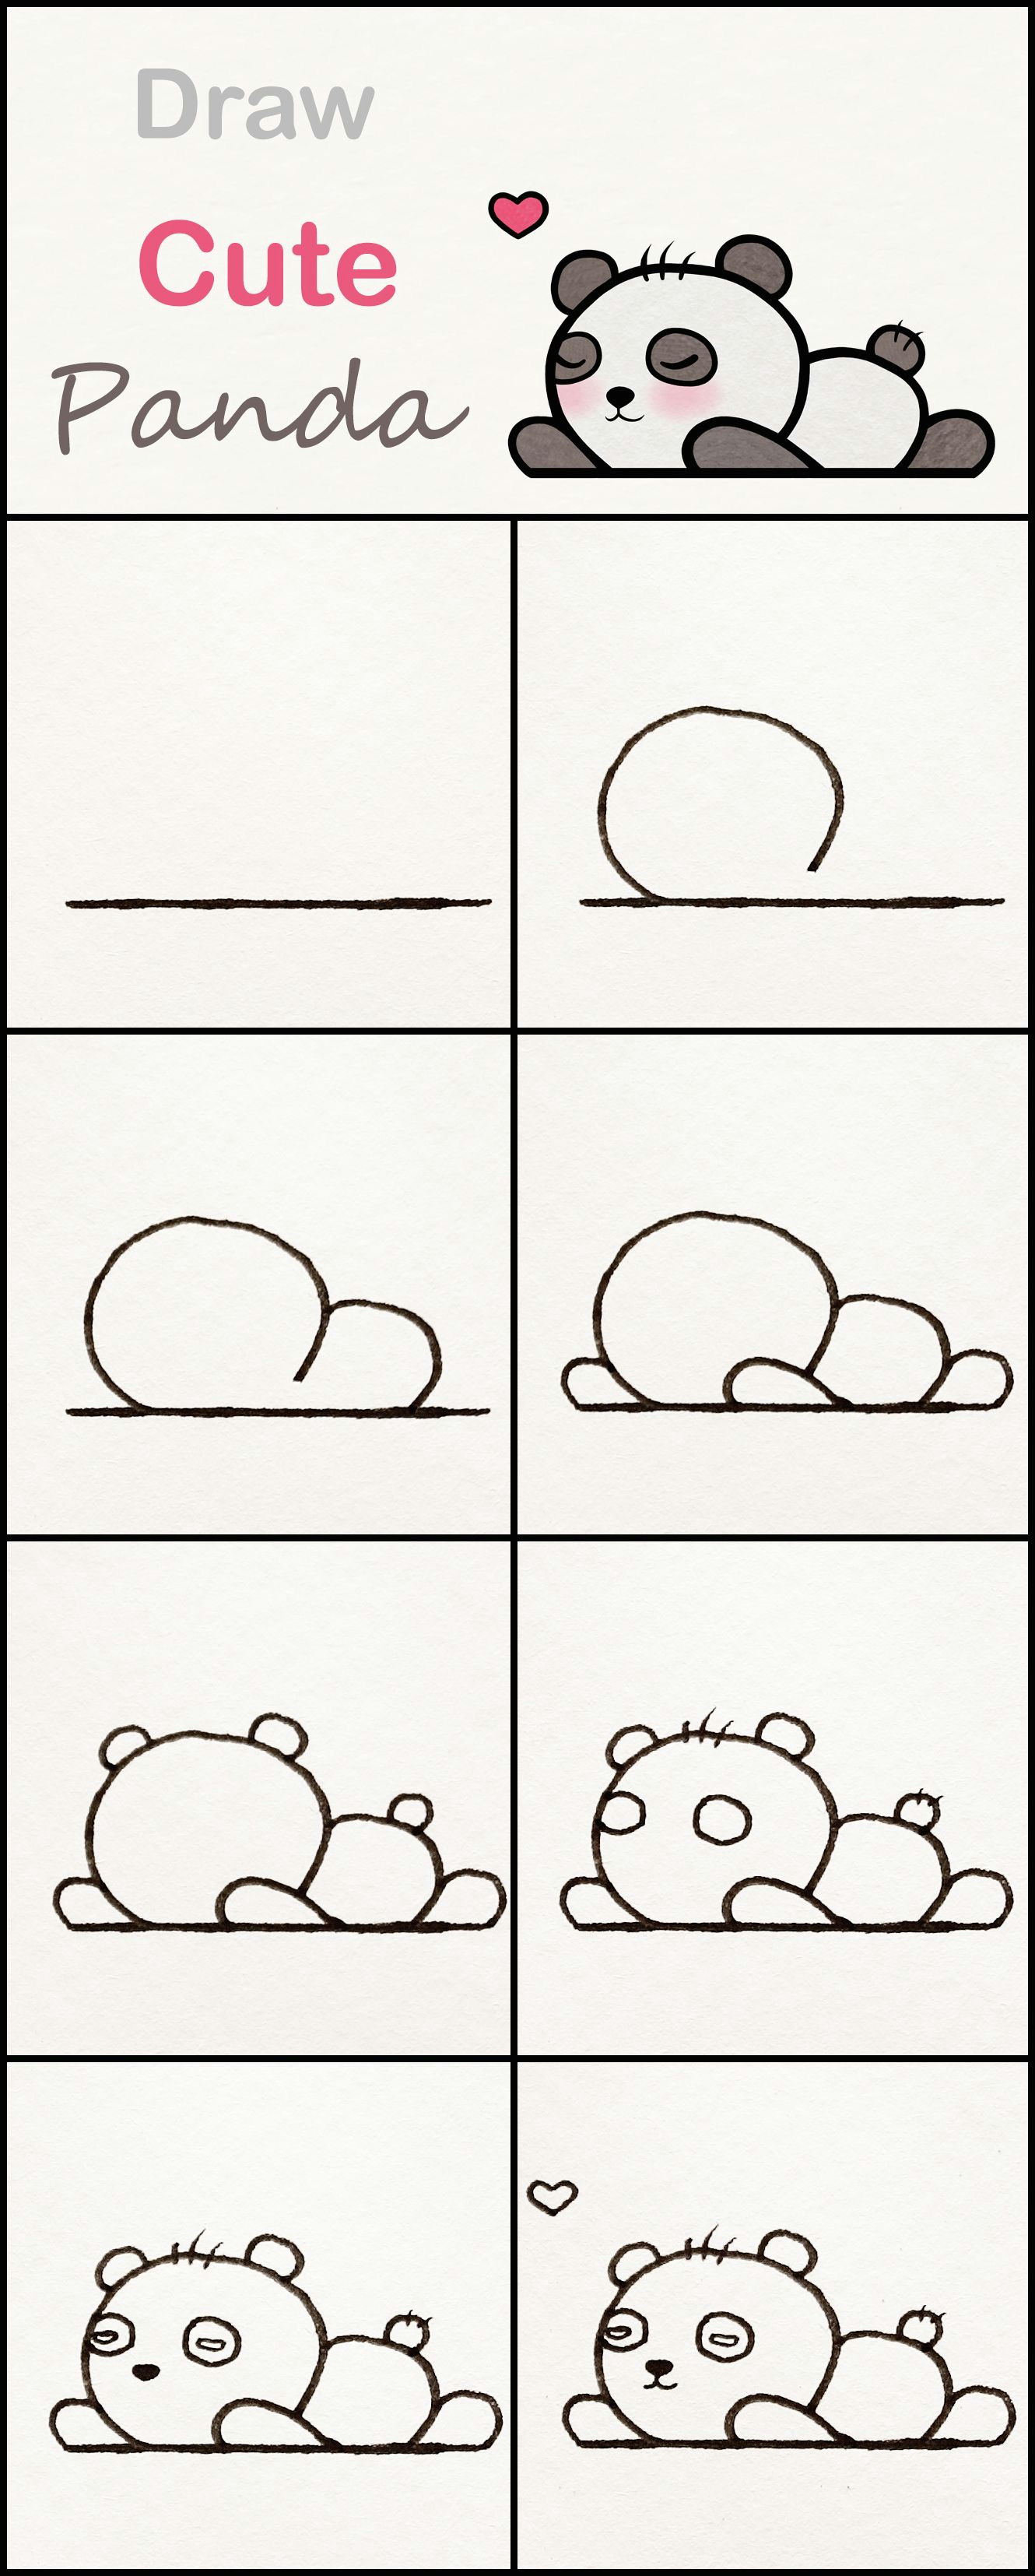 Easy Drawings Instructions Learn How to Draw A Cute Baby Panda Step by Step A Very Simple